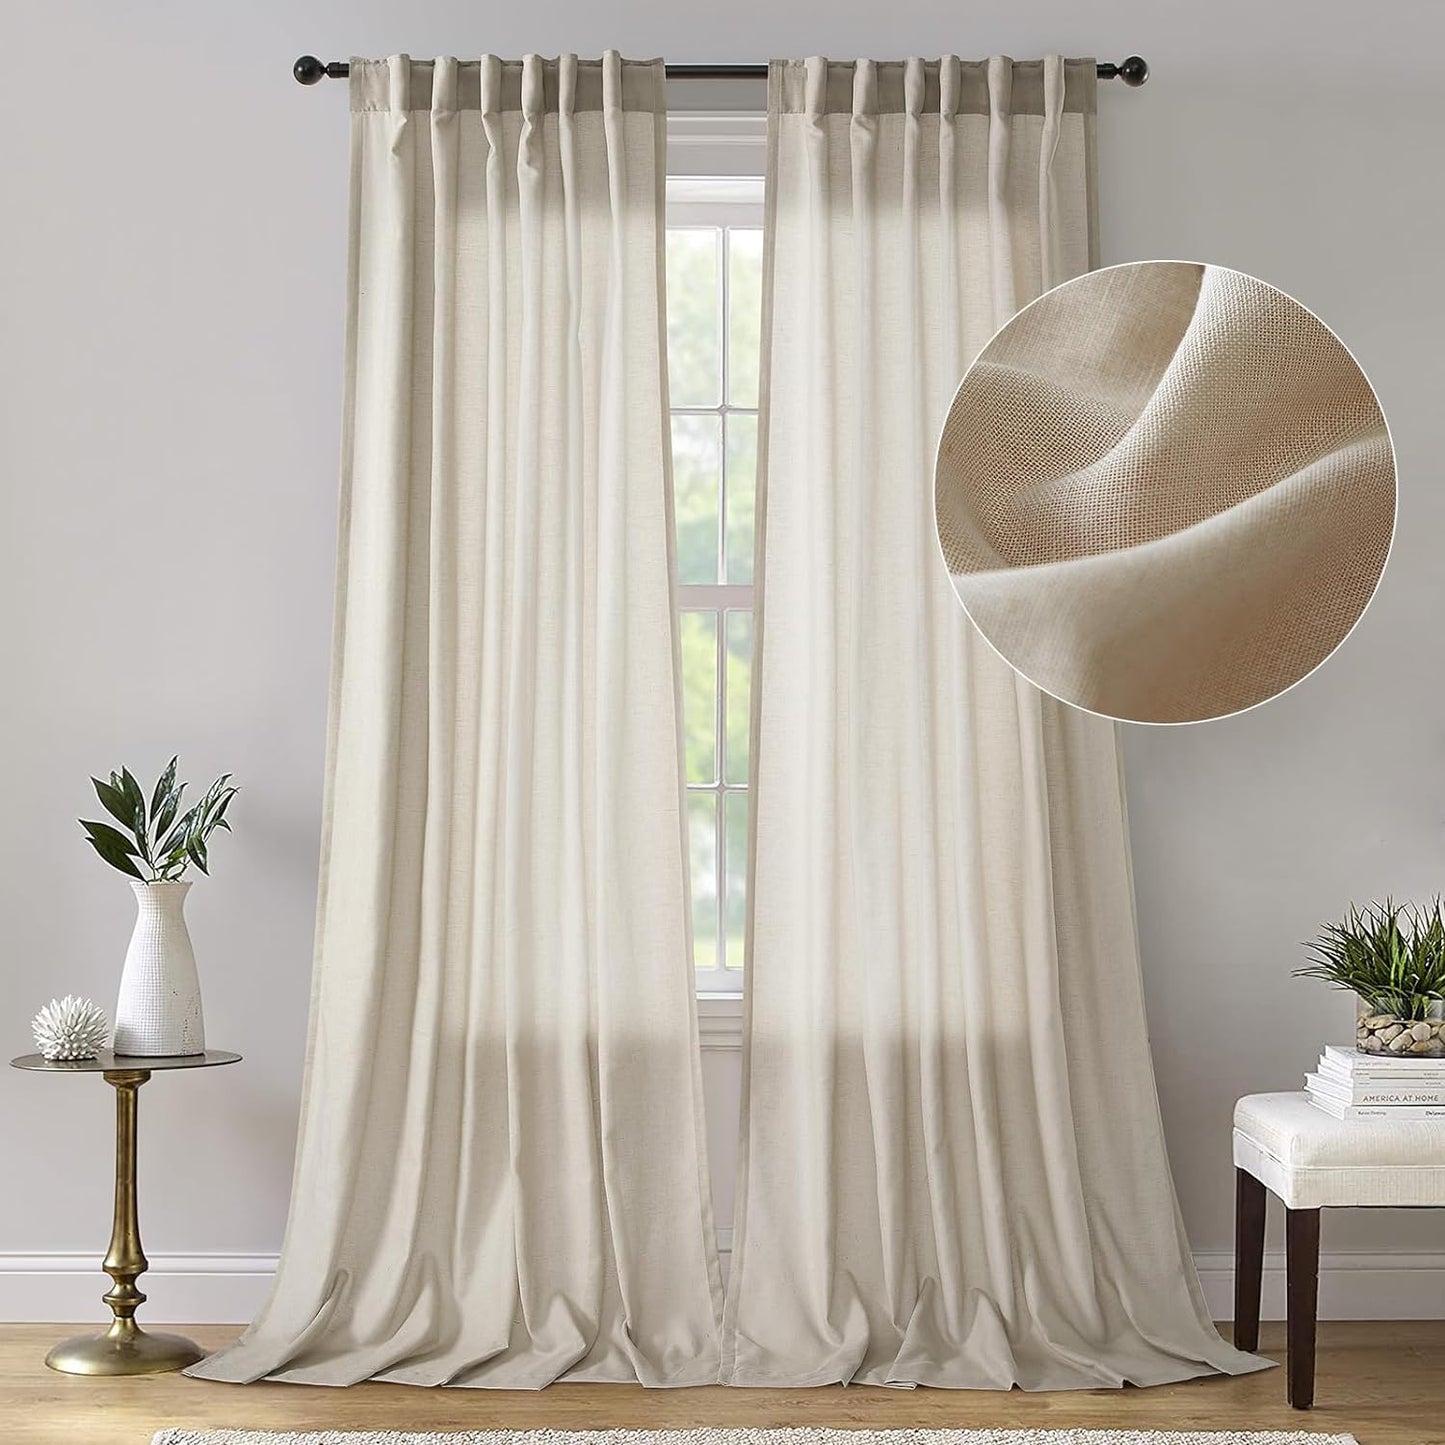 Dreaming Casa 102 Inch Long Curtains Semi Sheer Linen Curtain for Living Room Bedroom 2 Panels Pocket Floor Length Drapes with Back Tab, Natural, W52 X L102  Dreaming Casa Linen Taupe 1 X ( 52" W X 180 "L ) 